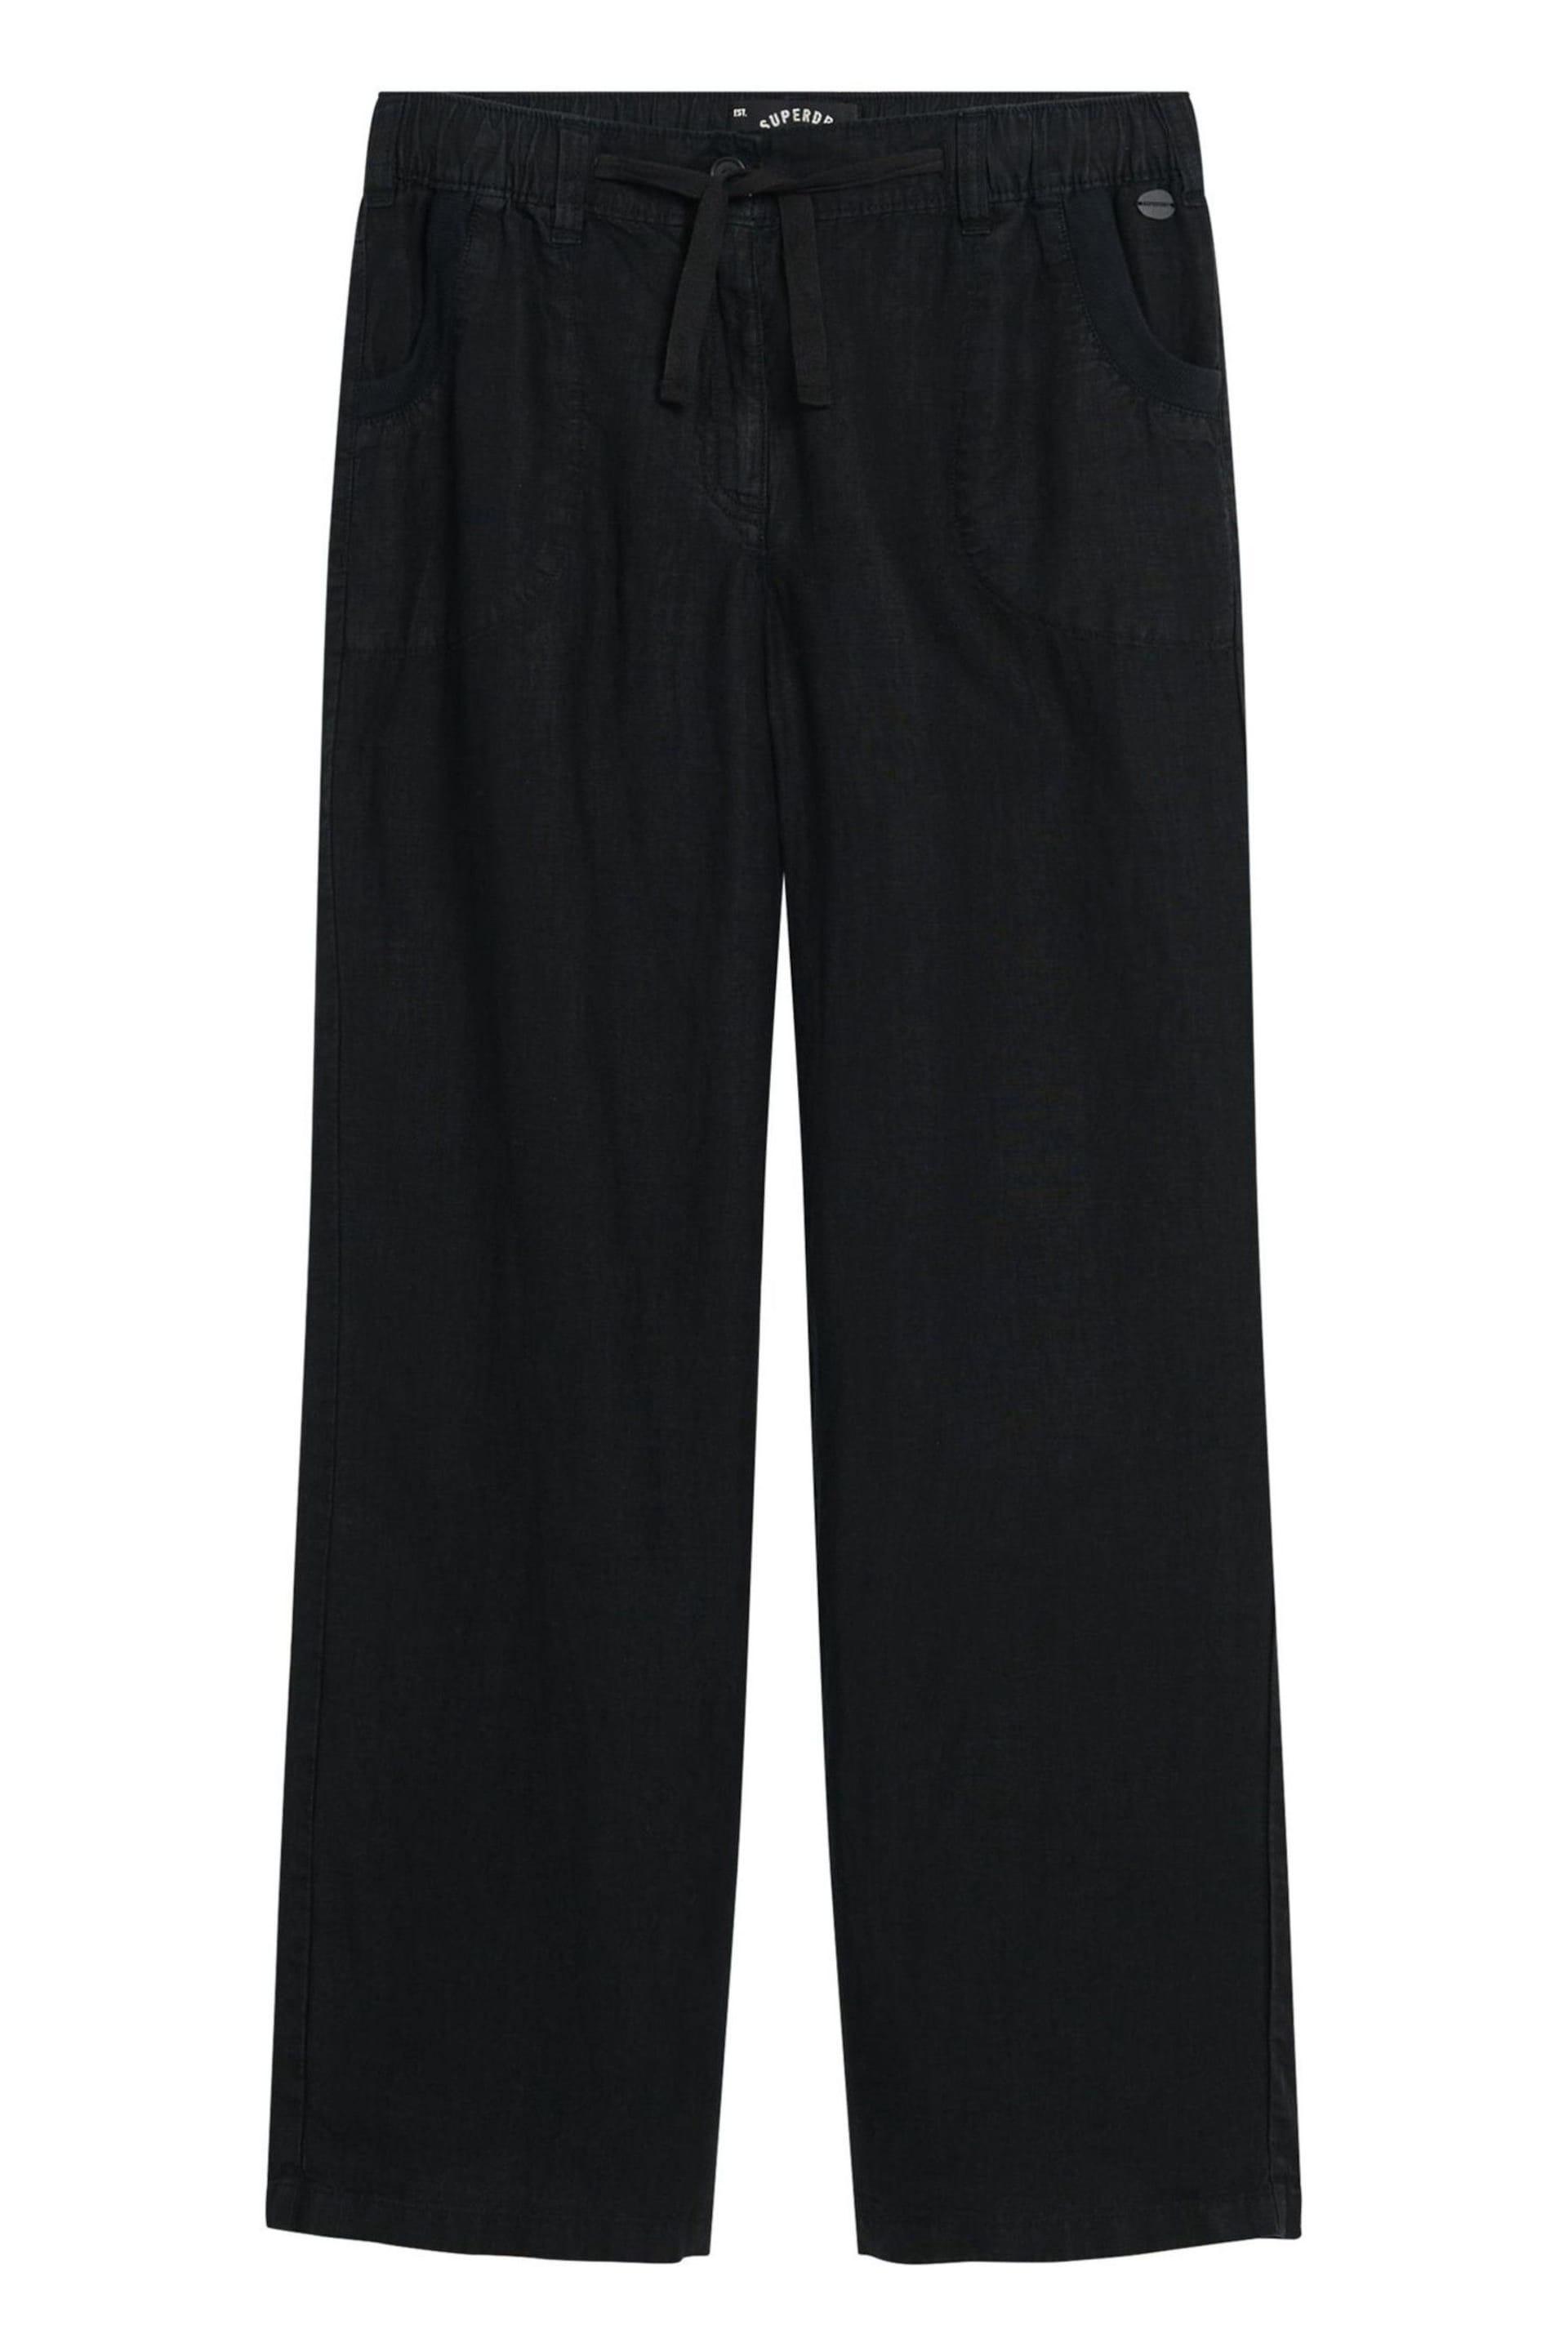 Superdry Black Linen Low Rise Trousers - Image 3 of 4